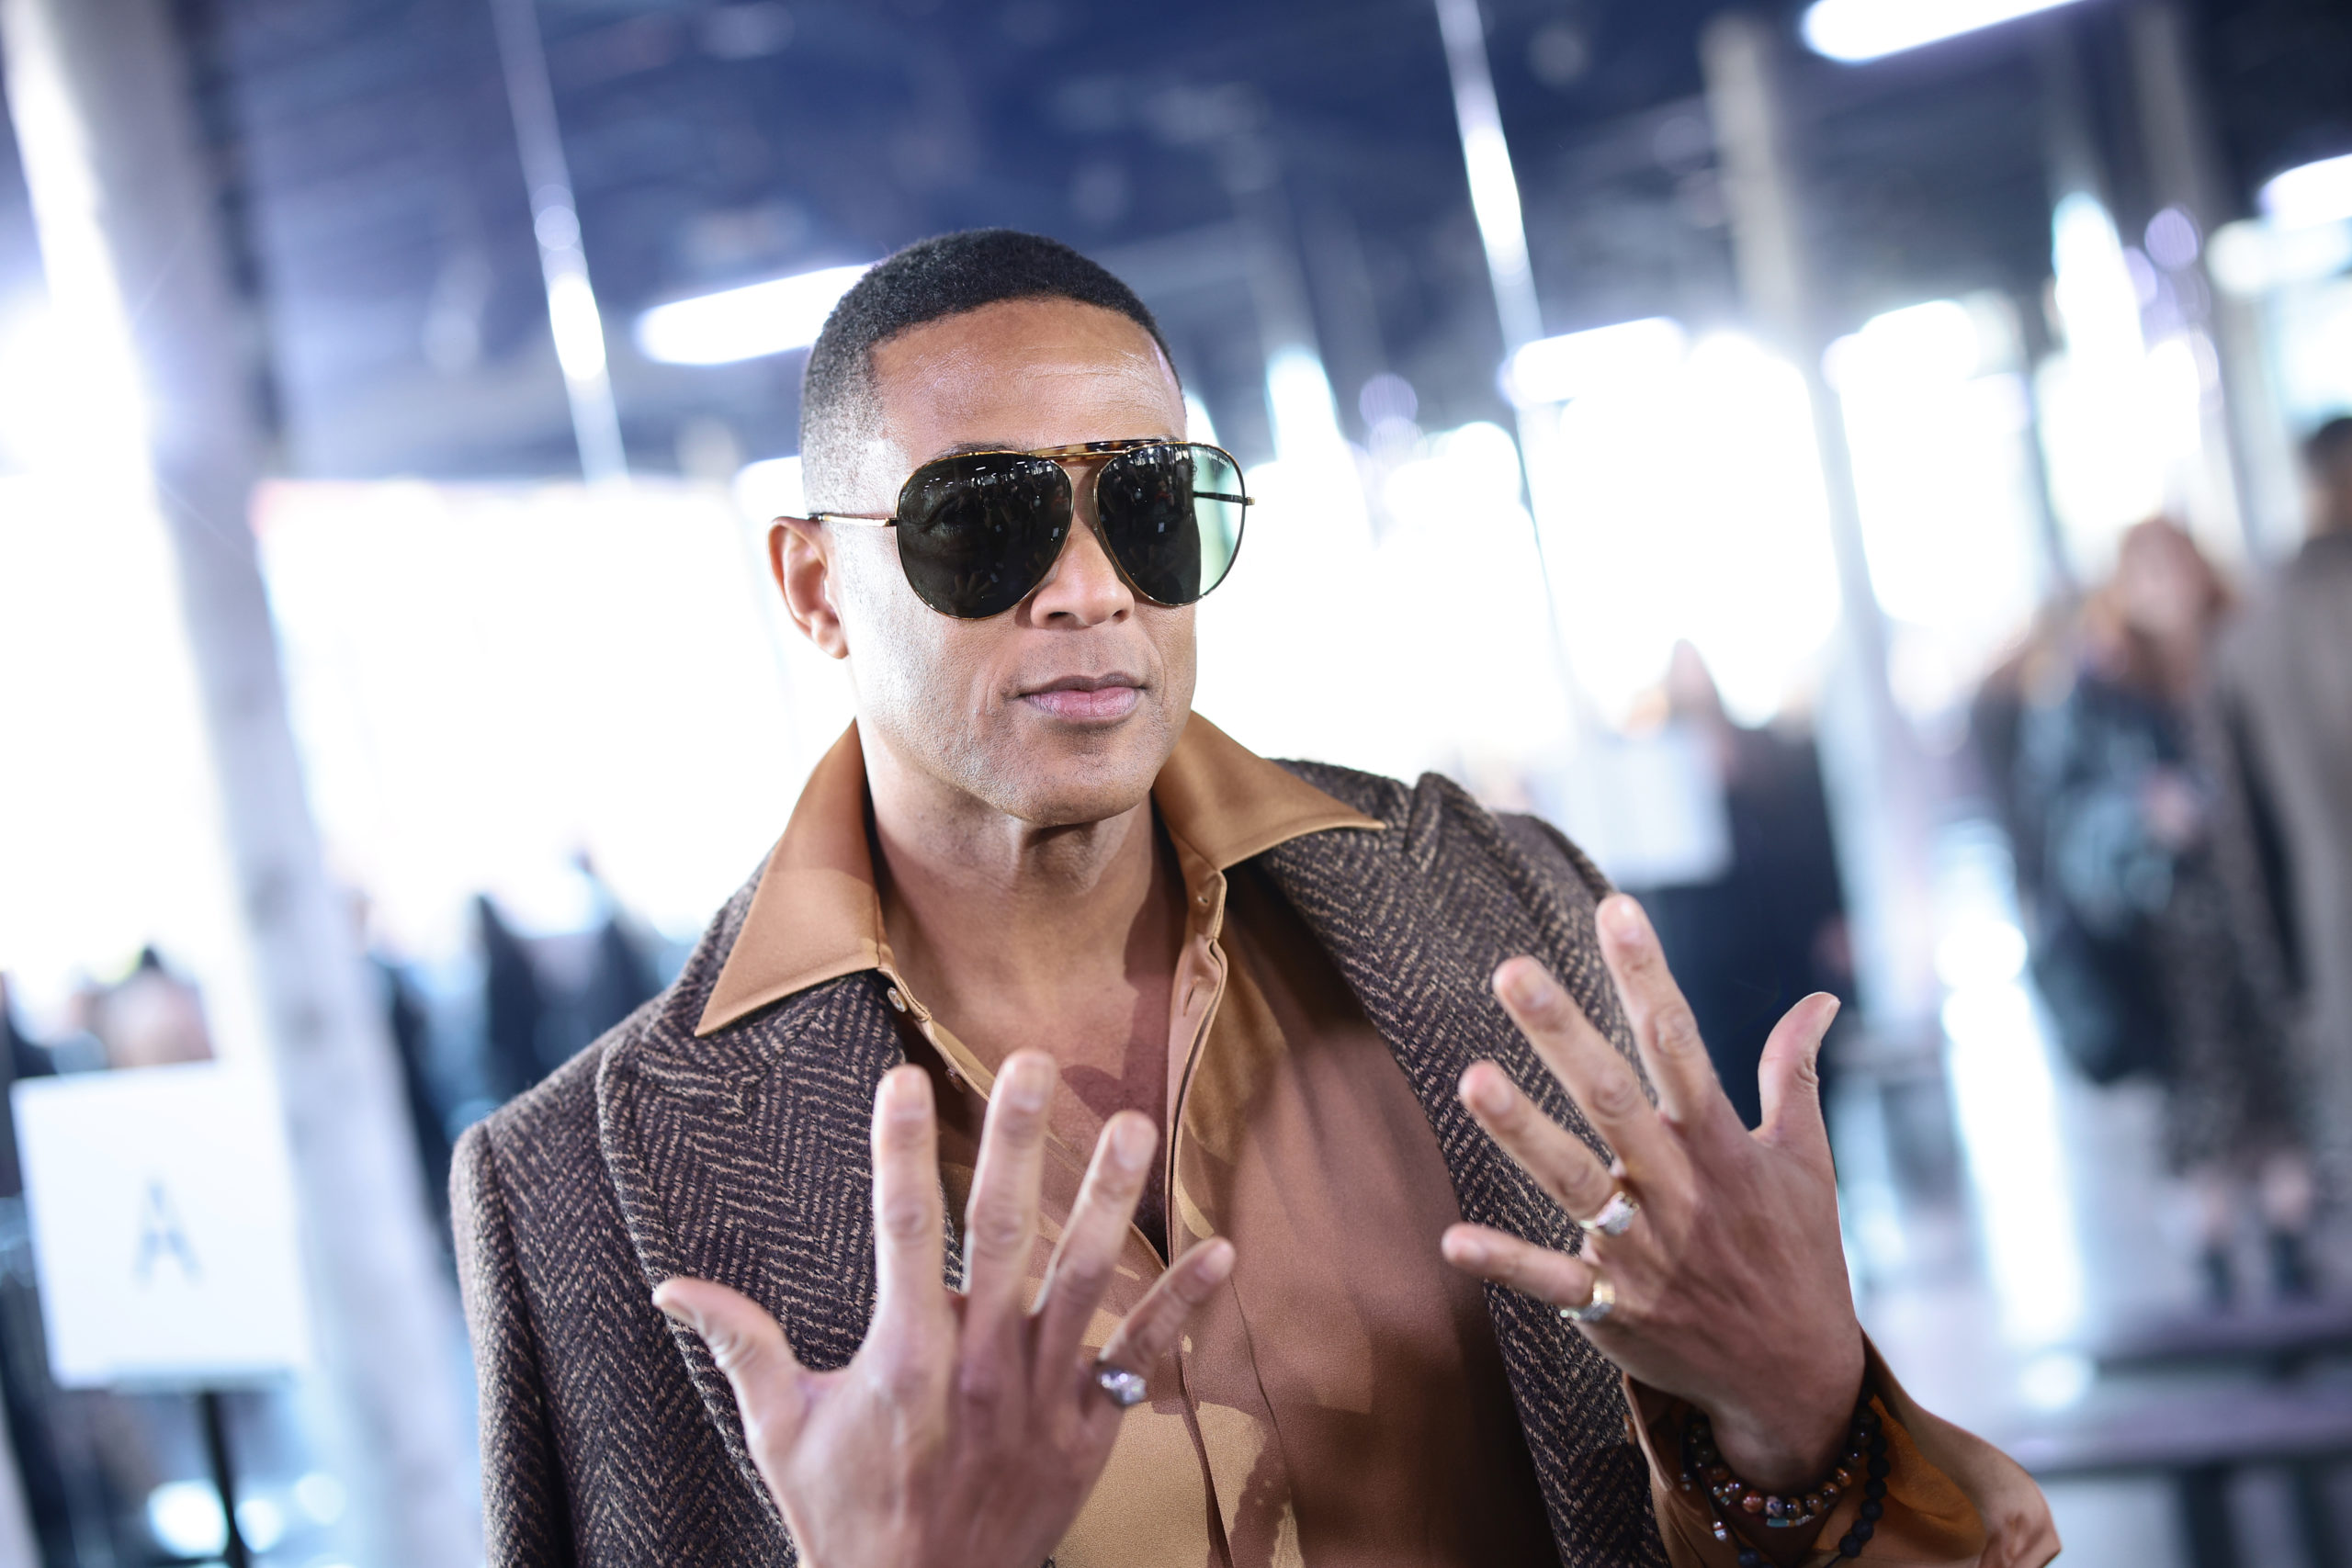 NEW YORK, NEW YORK - FEBRUARY 15: Don Lemon attends the Michael Kors Collection Fall/Winter 2023 Runway Show on February 15, 2023 in New York City. (Photo by Dimitrios Kambouris/Getty Images for Michael Kors)